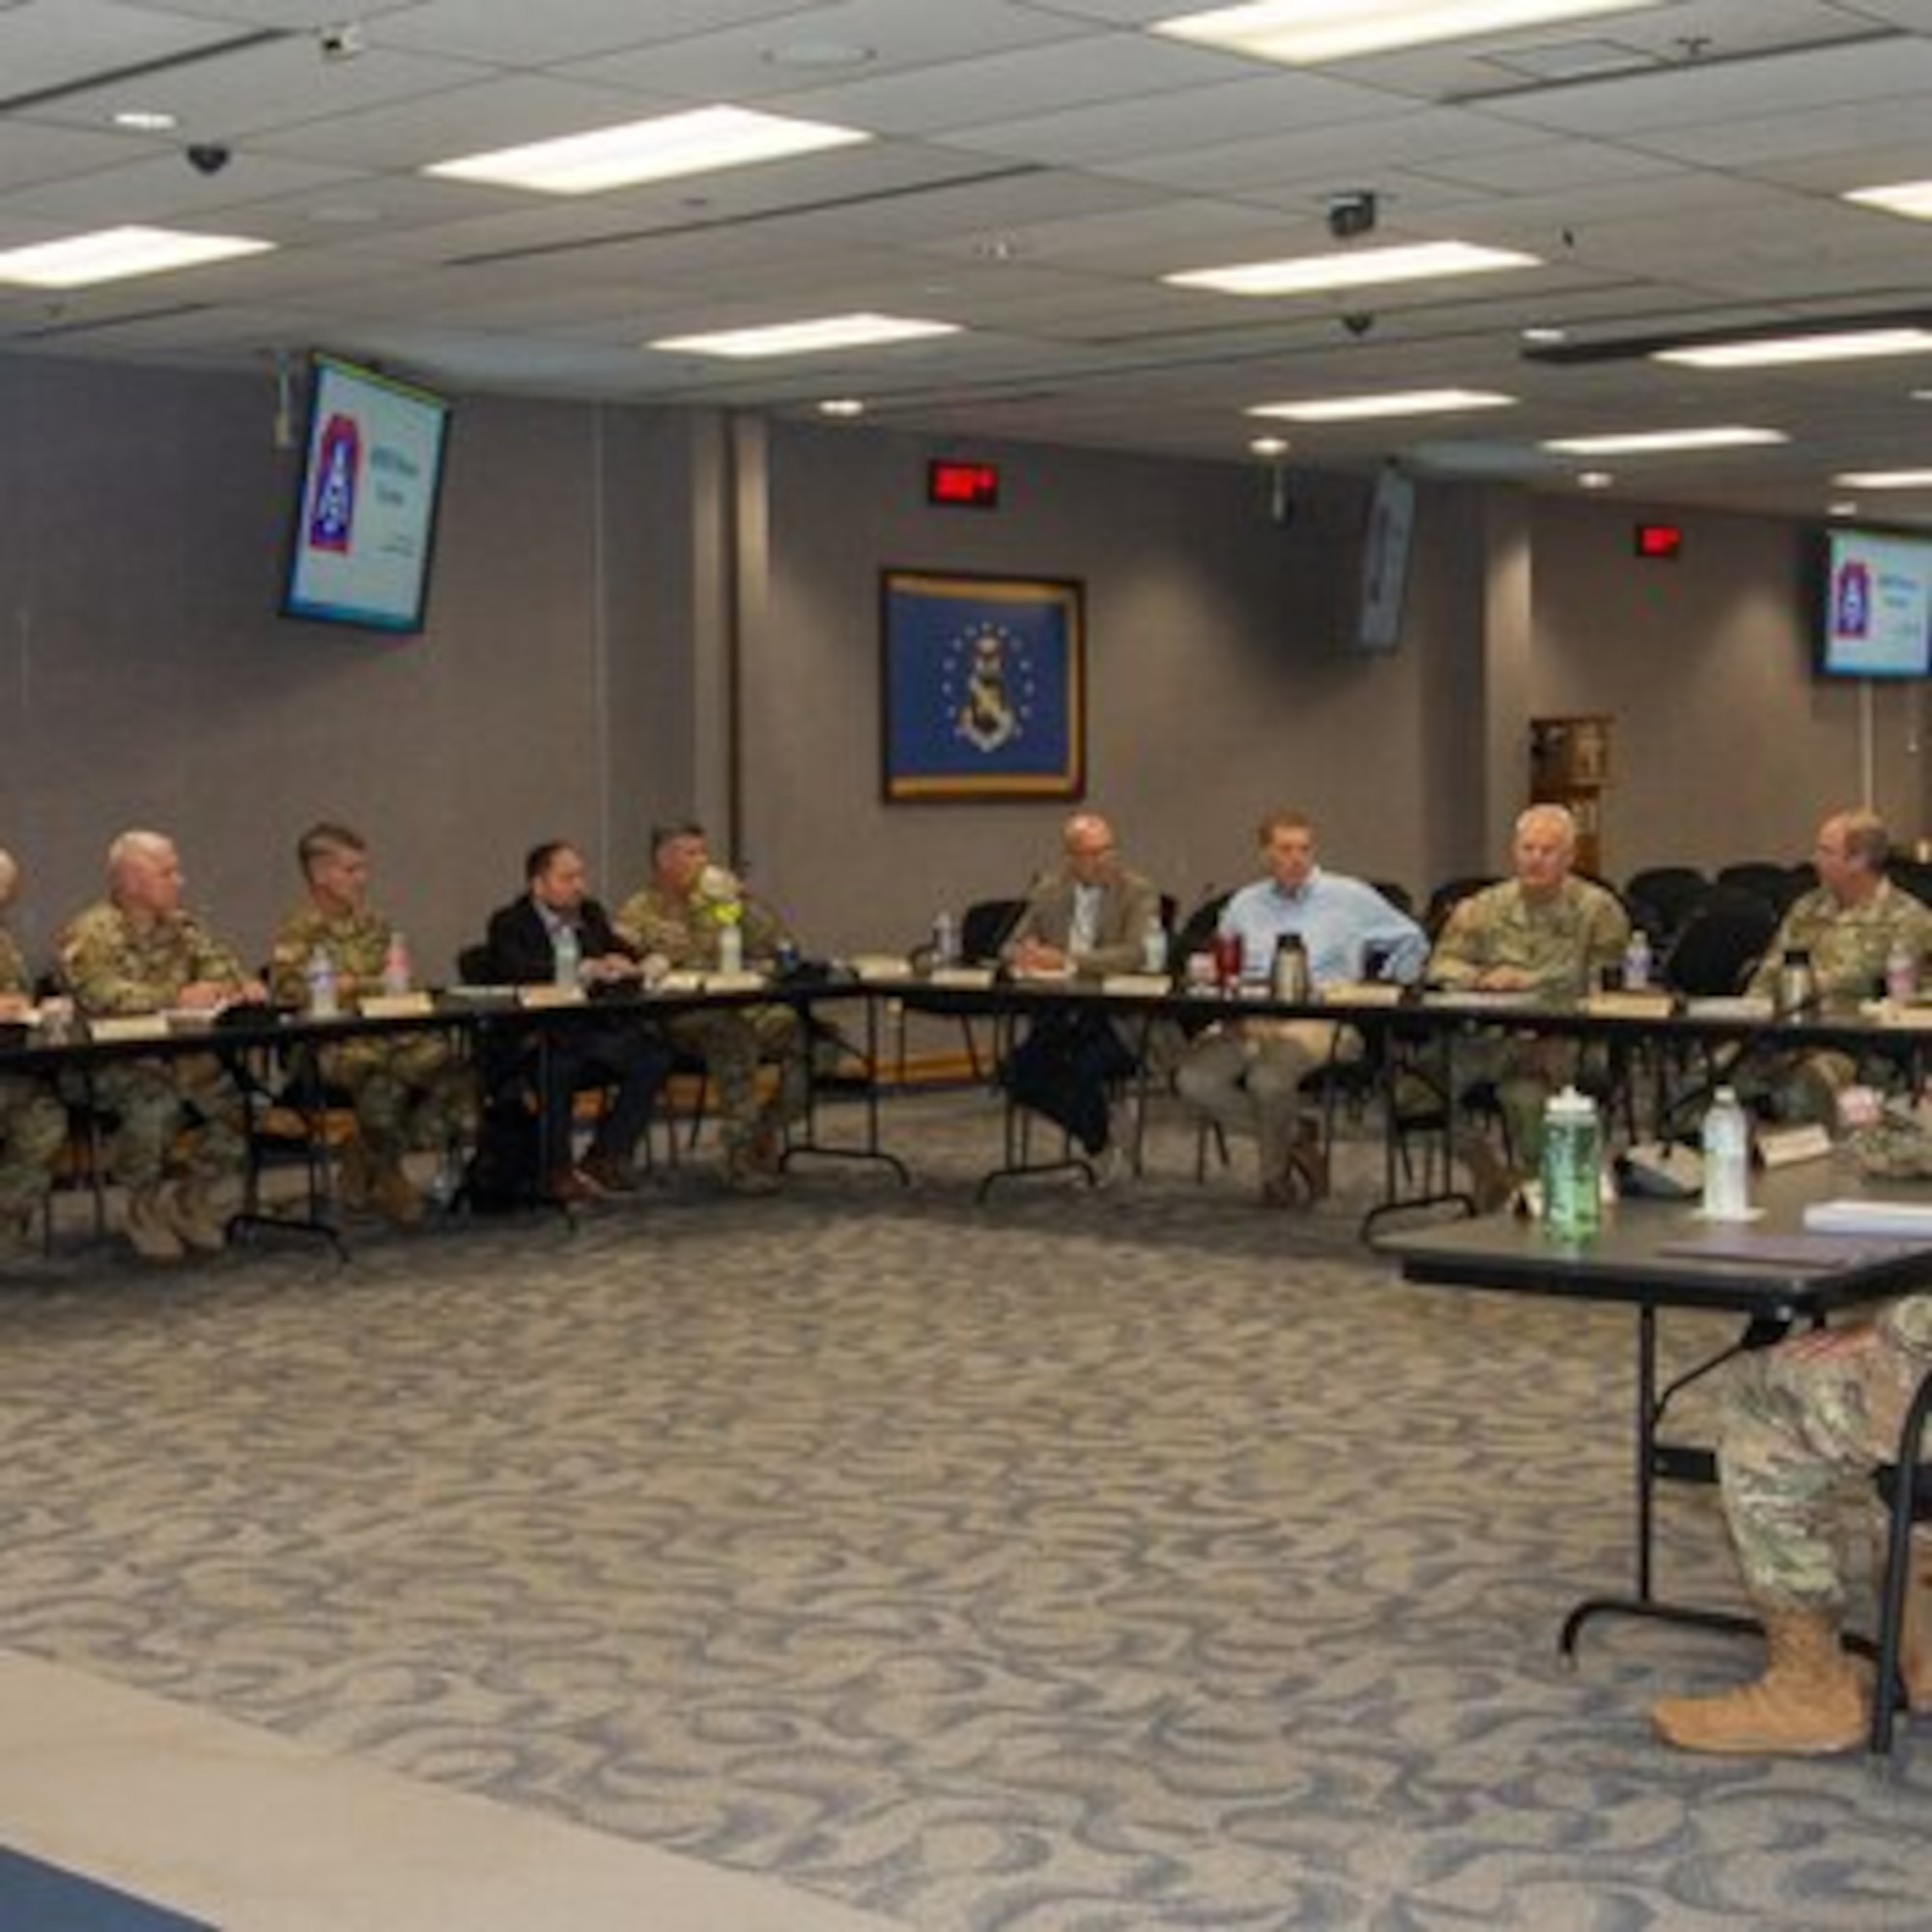 Military and civilian members sit at a table.